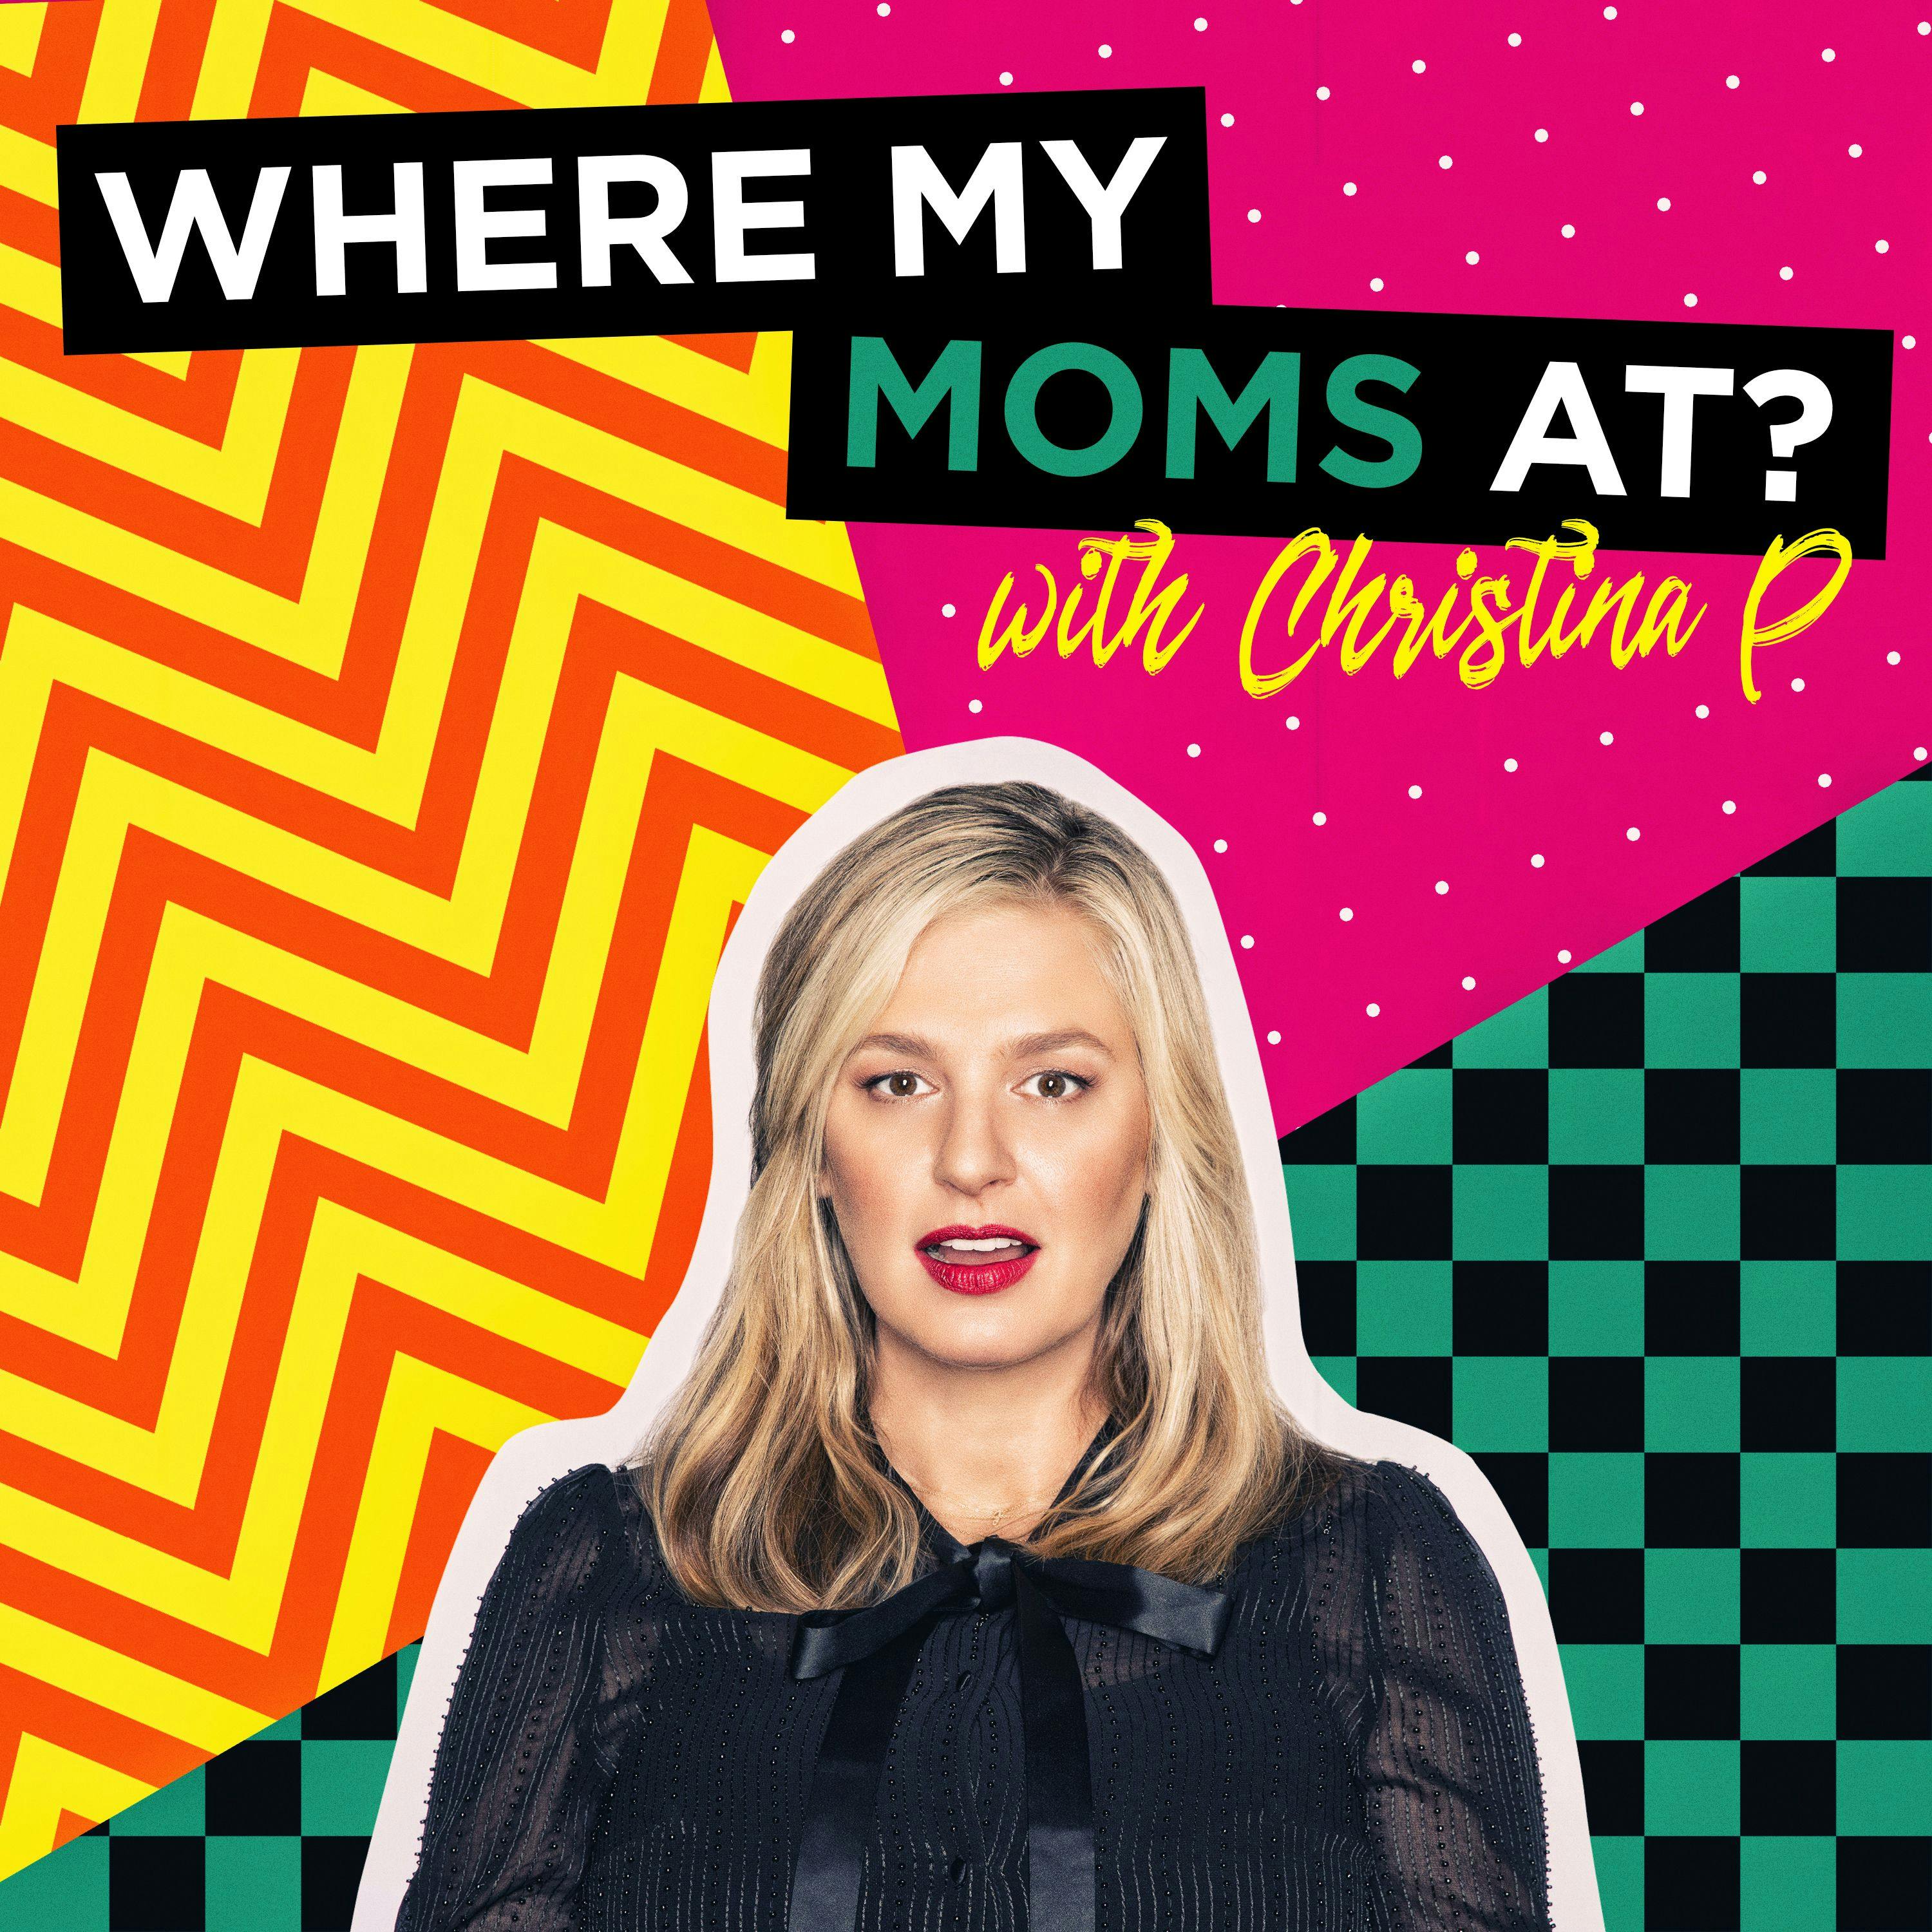 Ep. 117 - Cool Dad Moves - Where My Moms At w/ Christina P